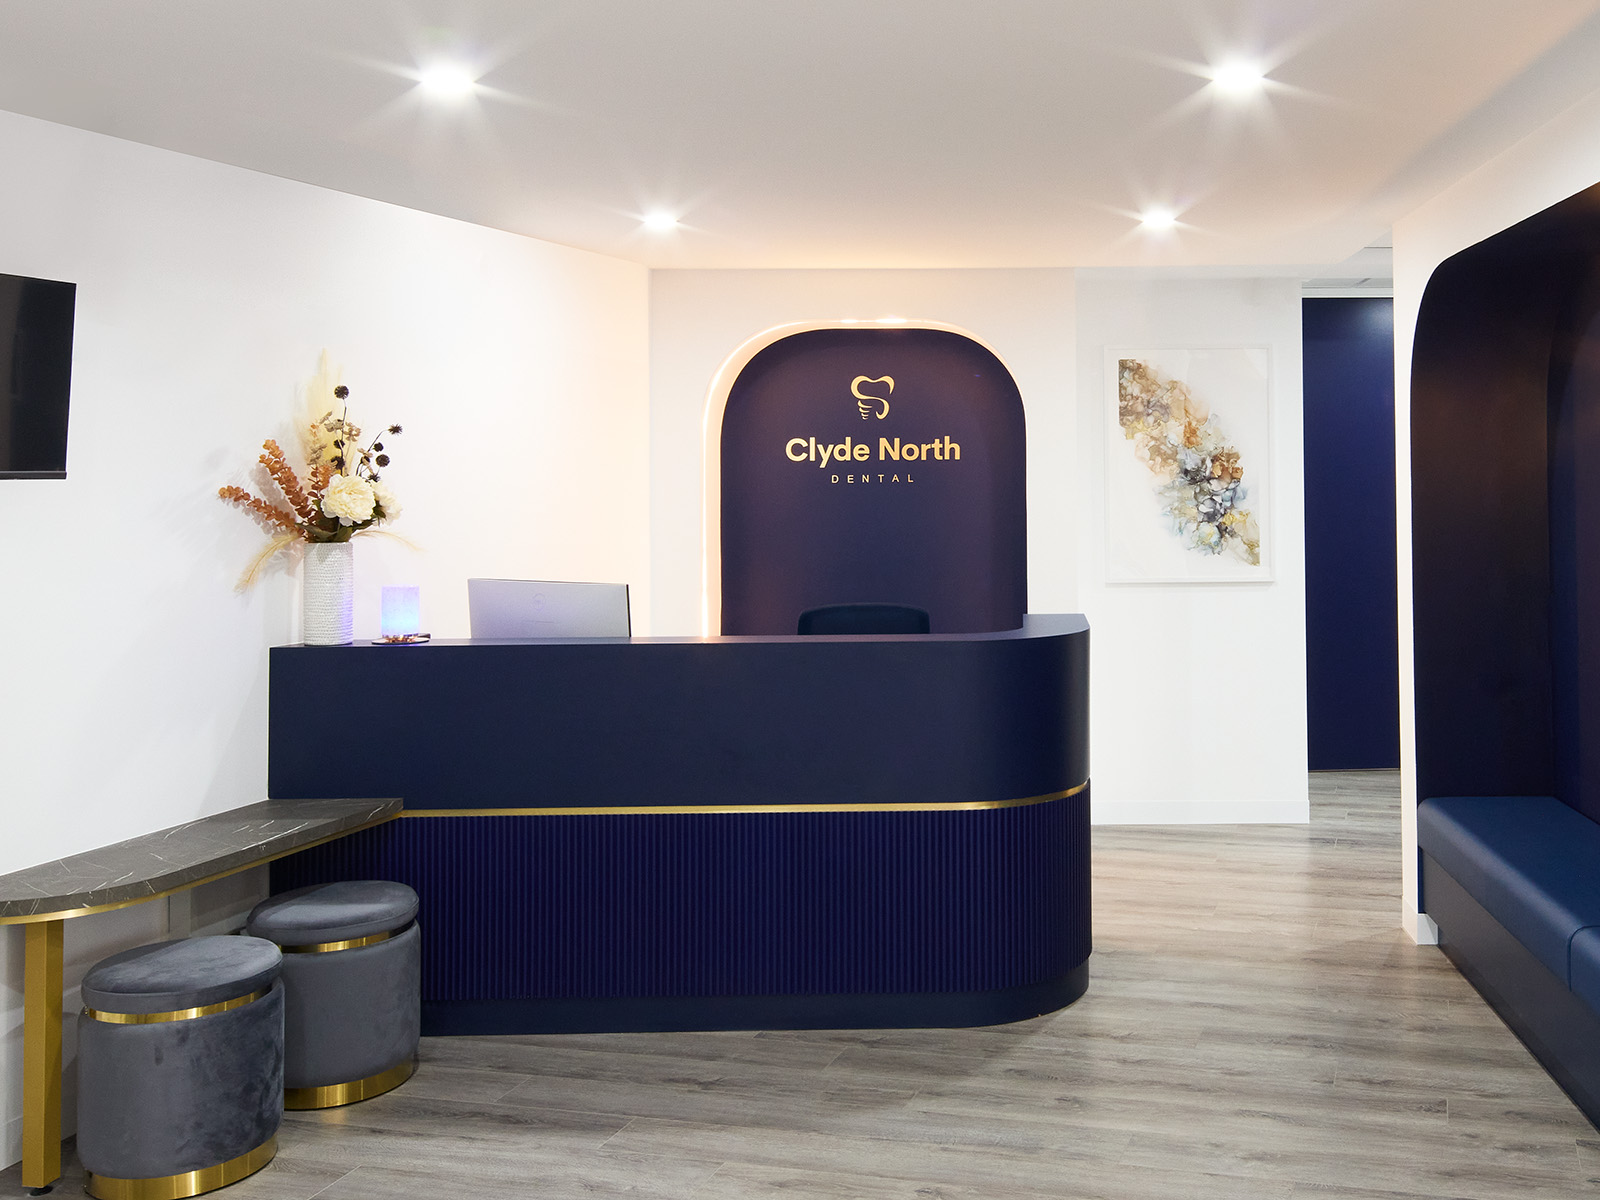 Clyde North Dental Fitout by Eagleheart